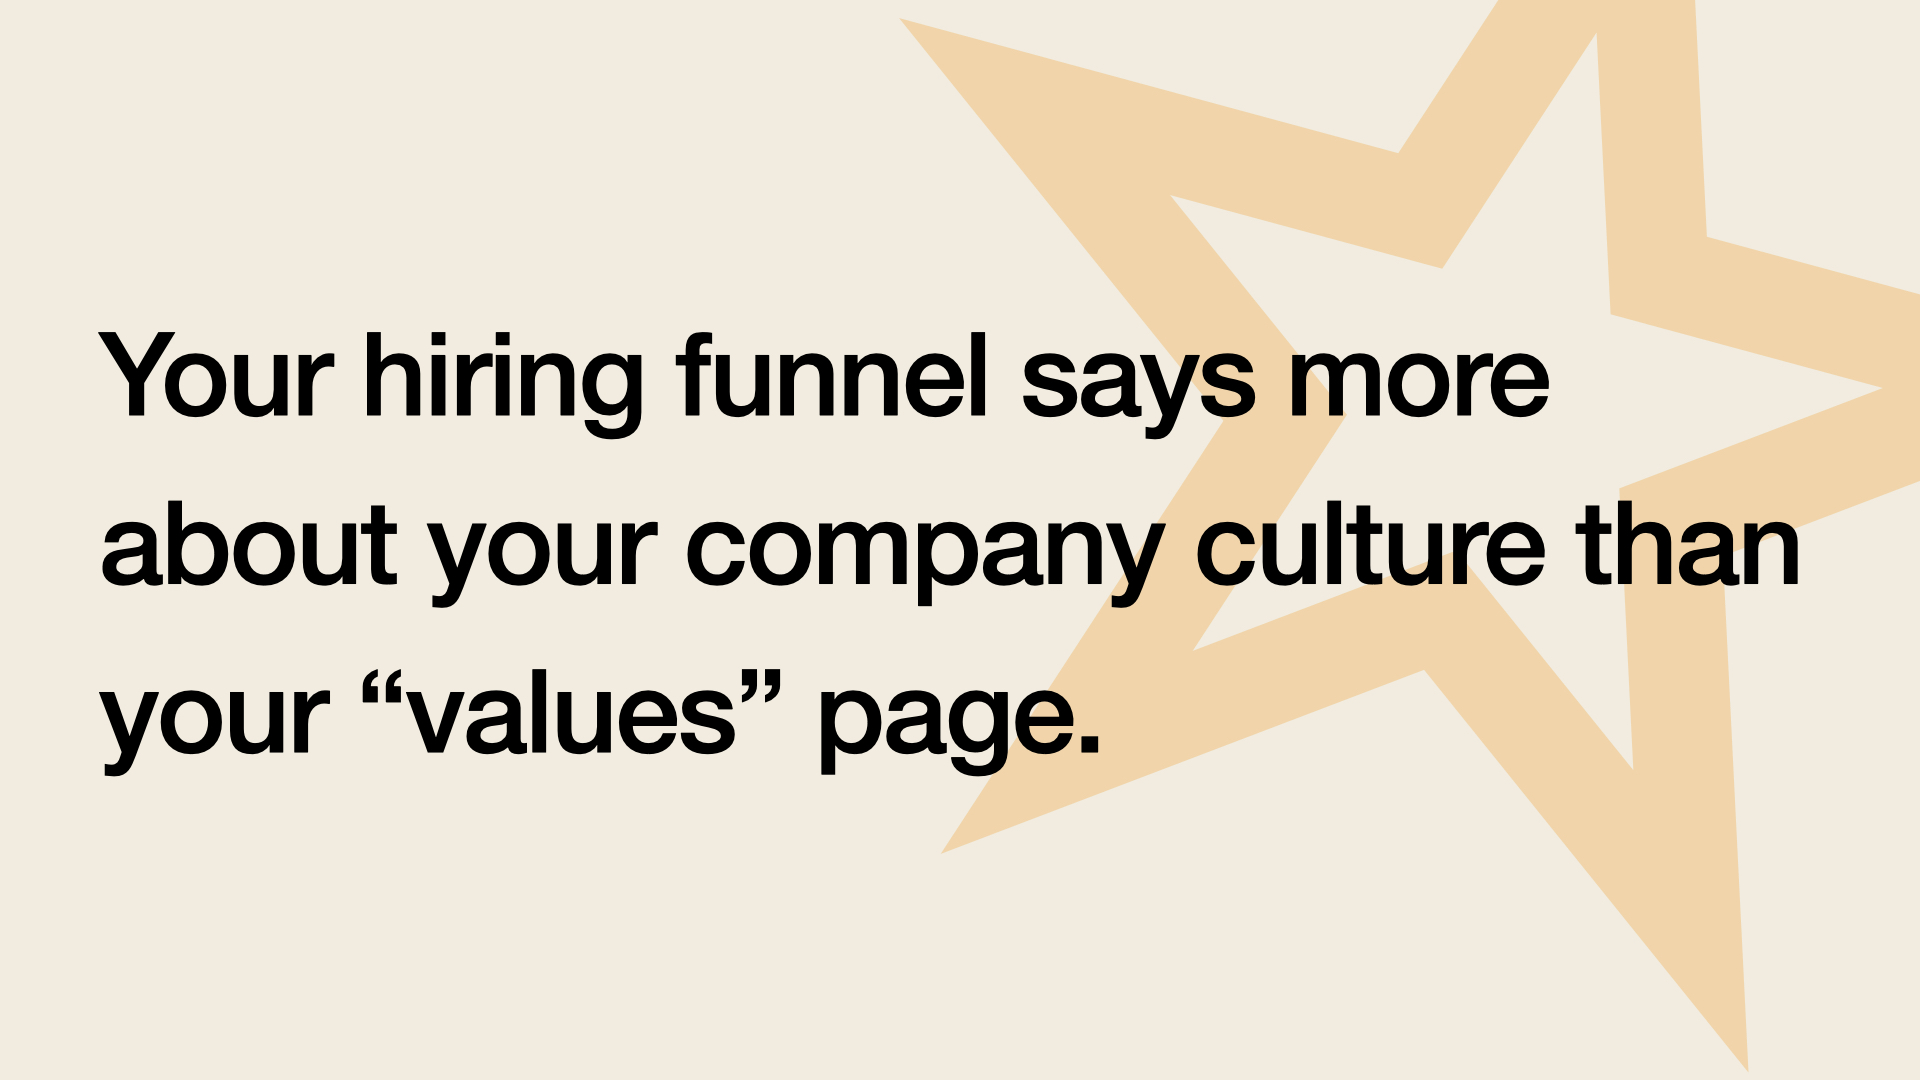 Your hiring funnel says more about your culture than your 'values' page